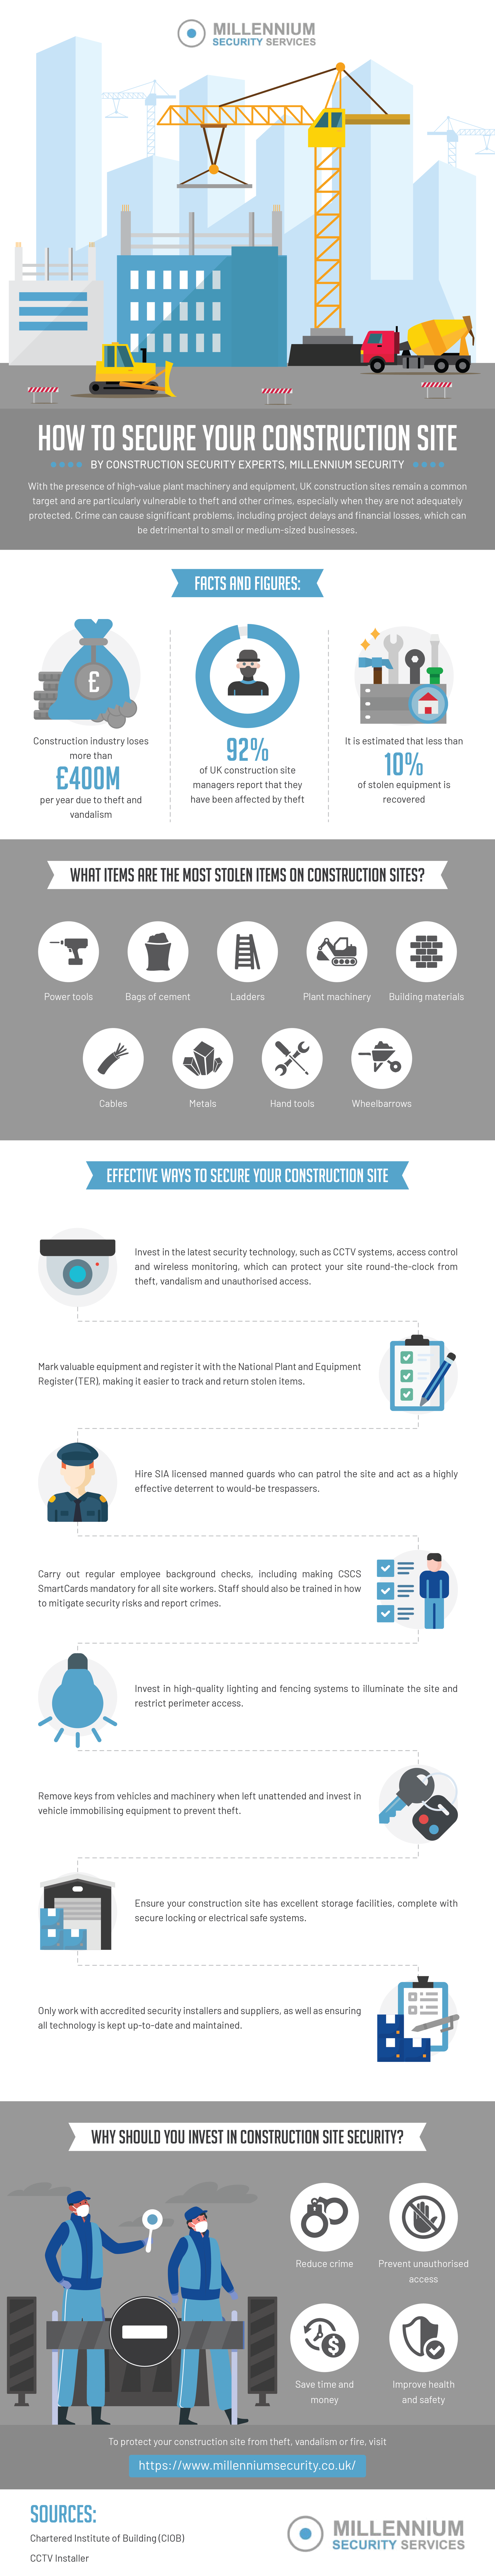 Securing a Construction Site Infographic